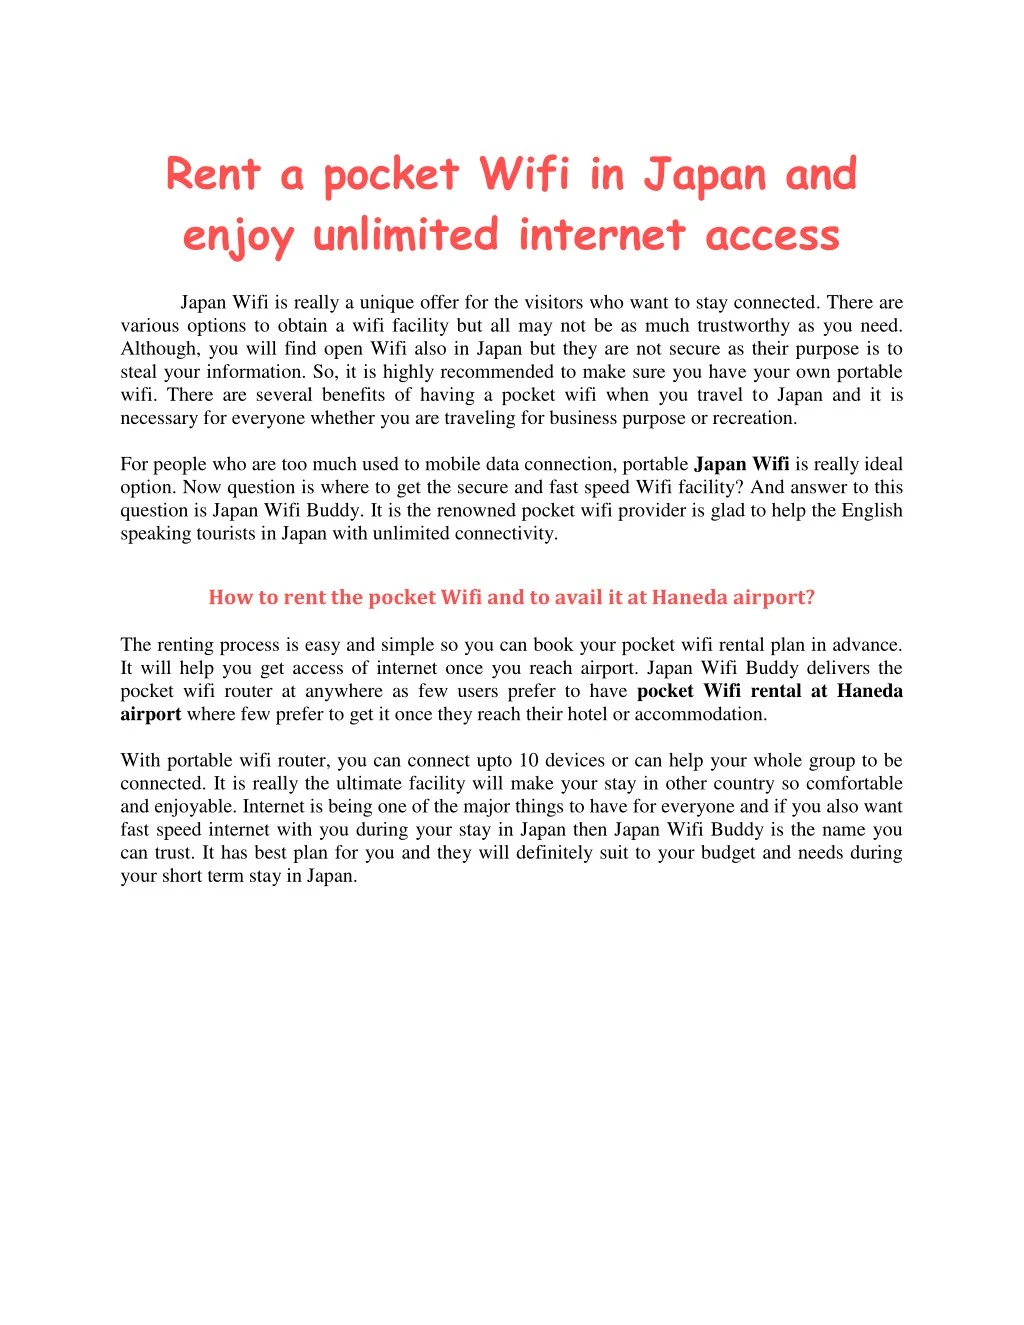 rent a pocket wifi in japan and enjoy unlimited